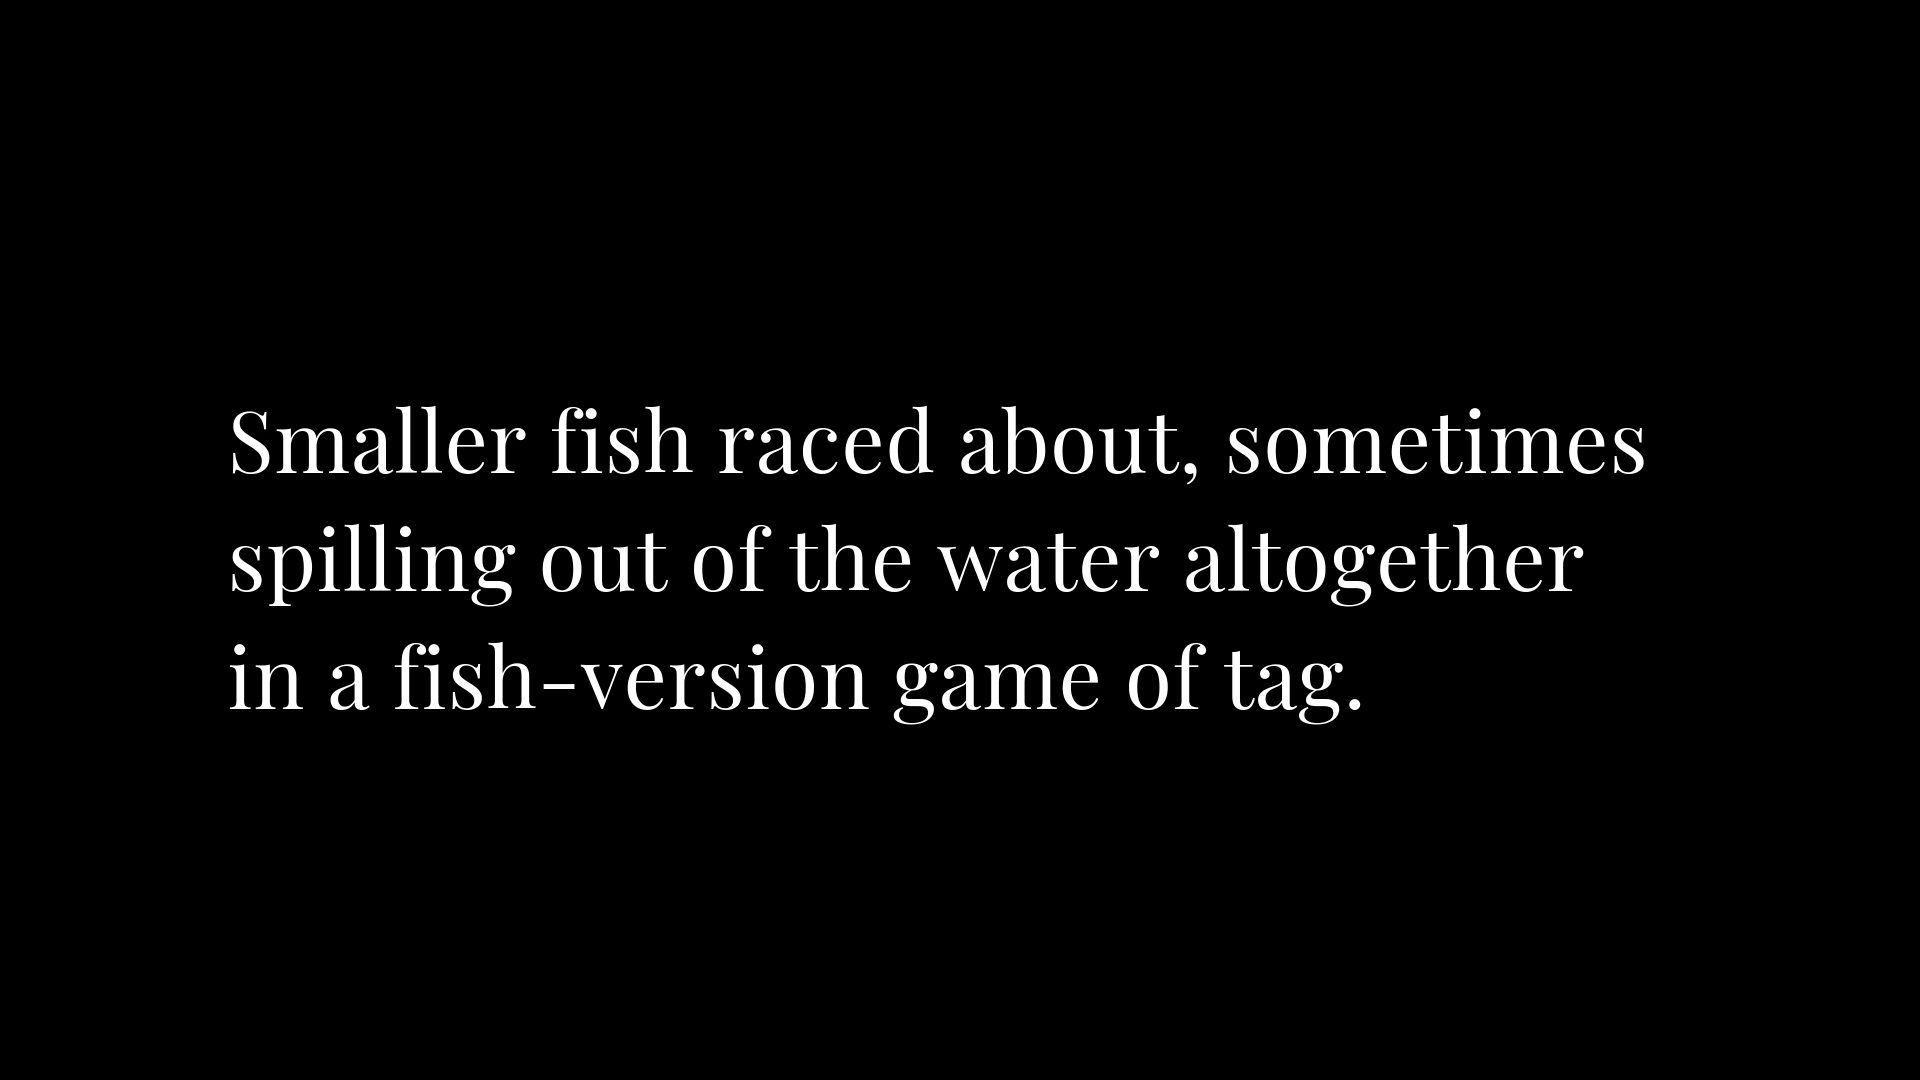 A black background with white text that reads " the smaller fish raced about, something is going out of the water altogether."